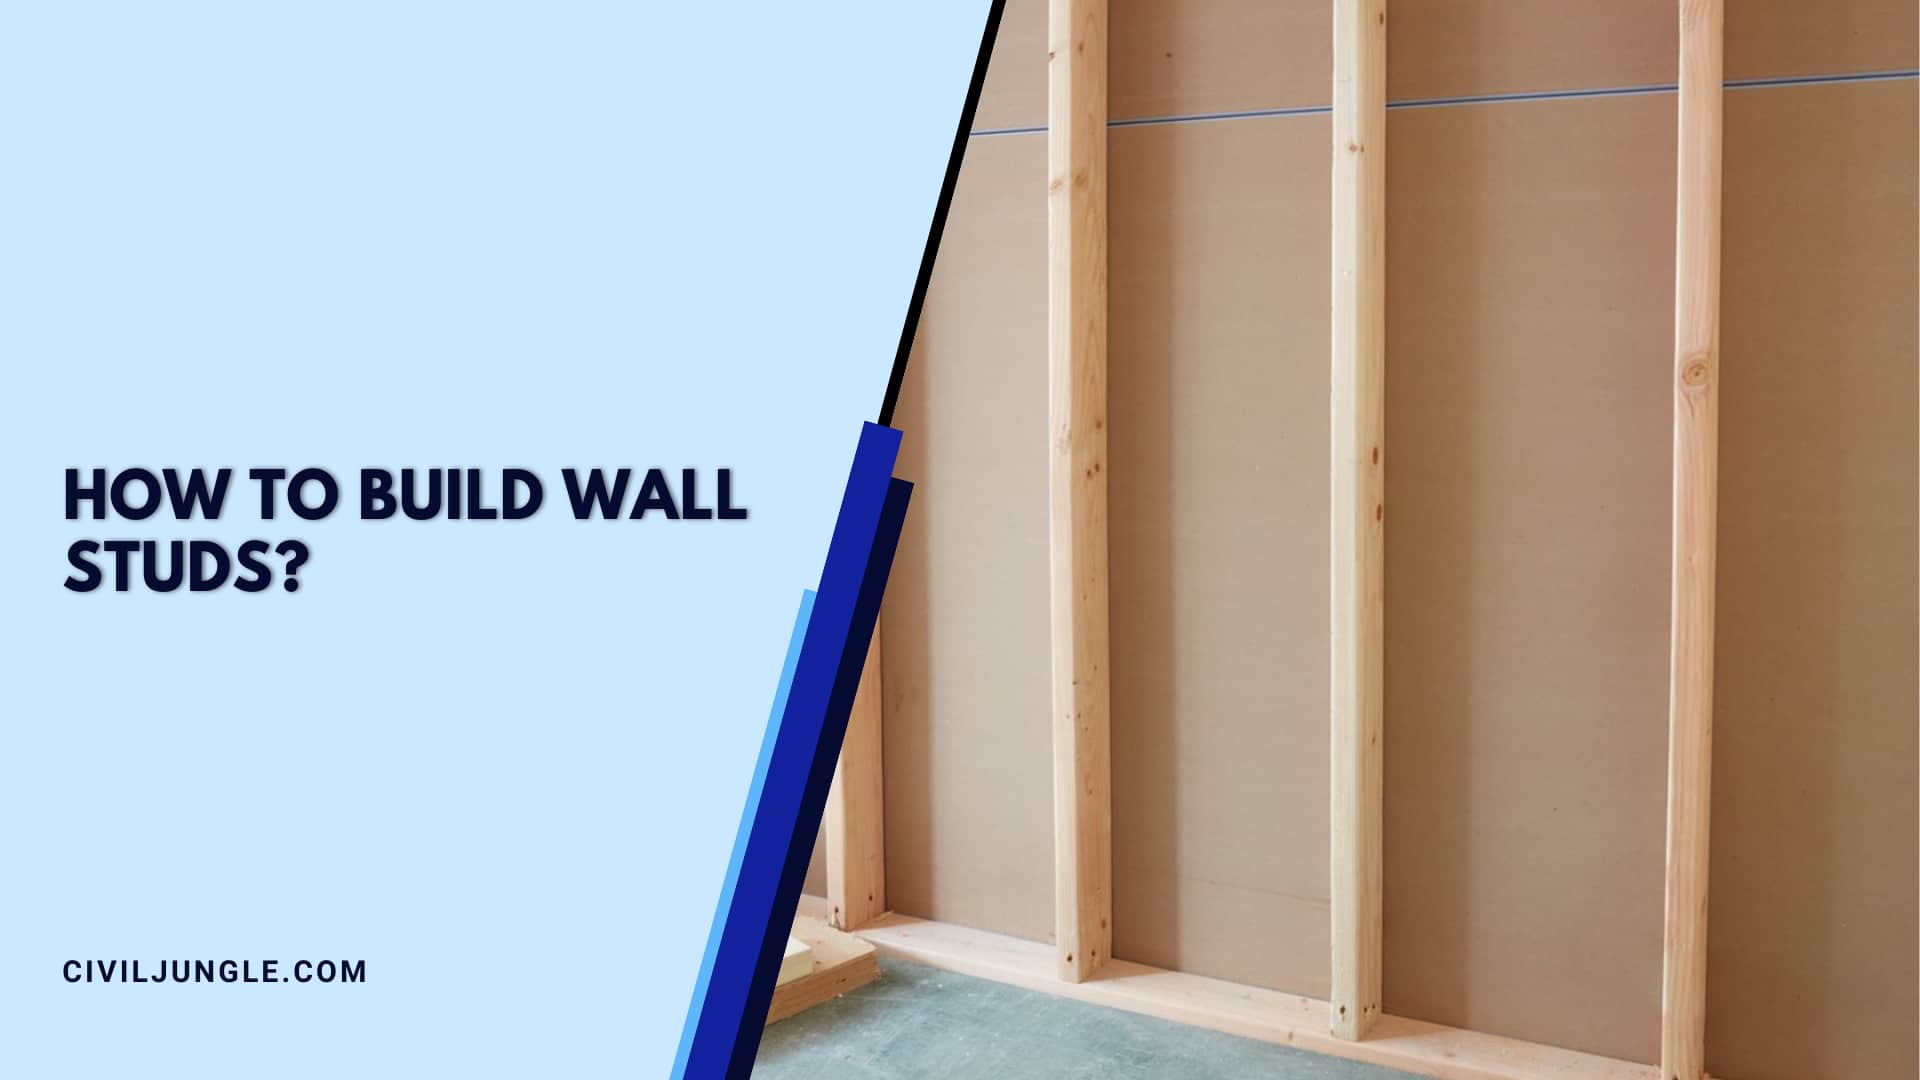 How to Build Wall Studs?